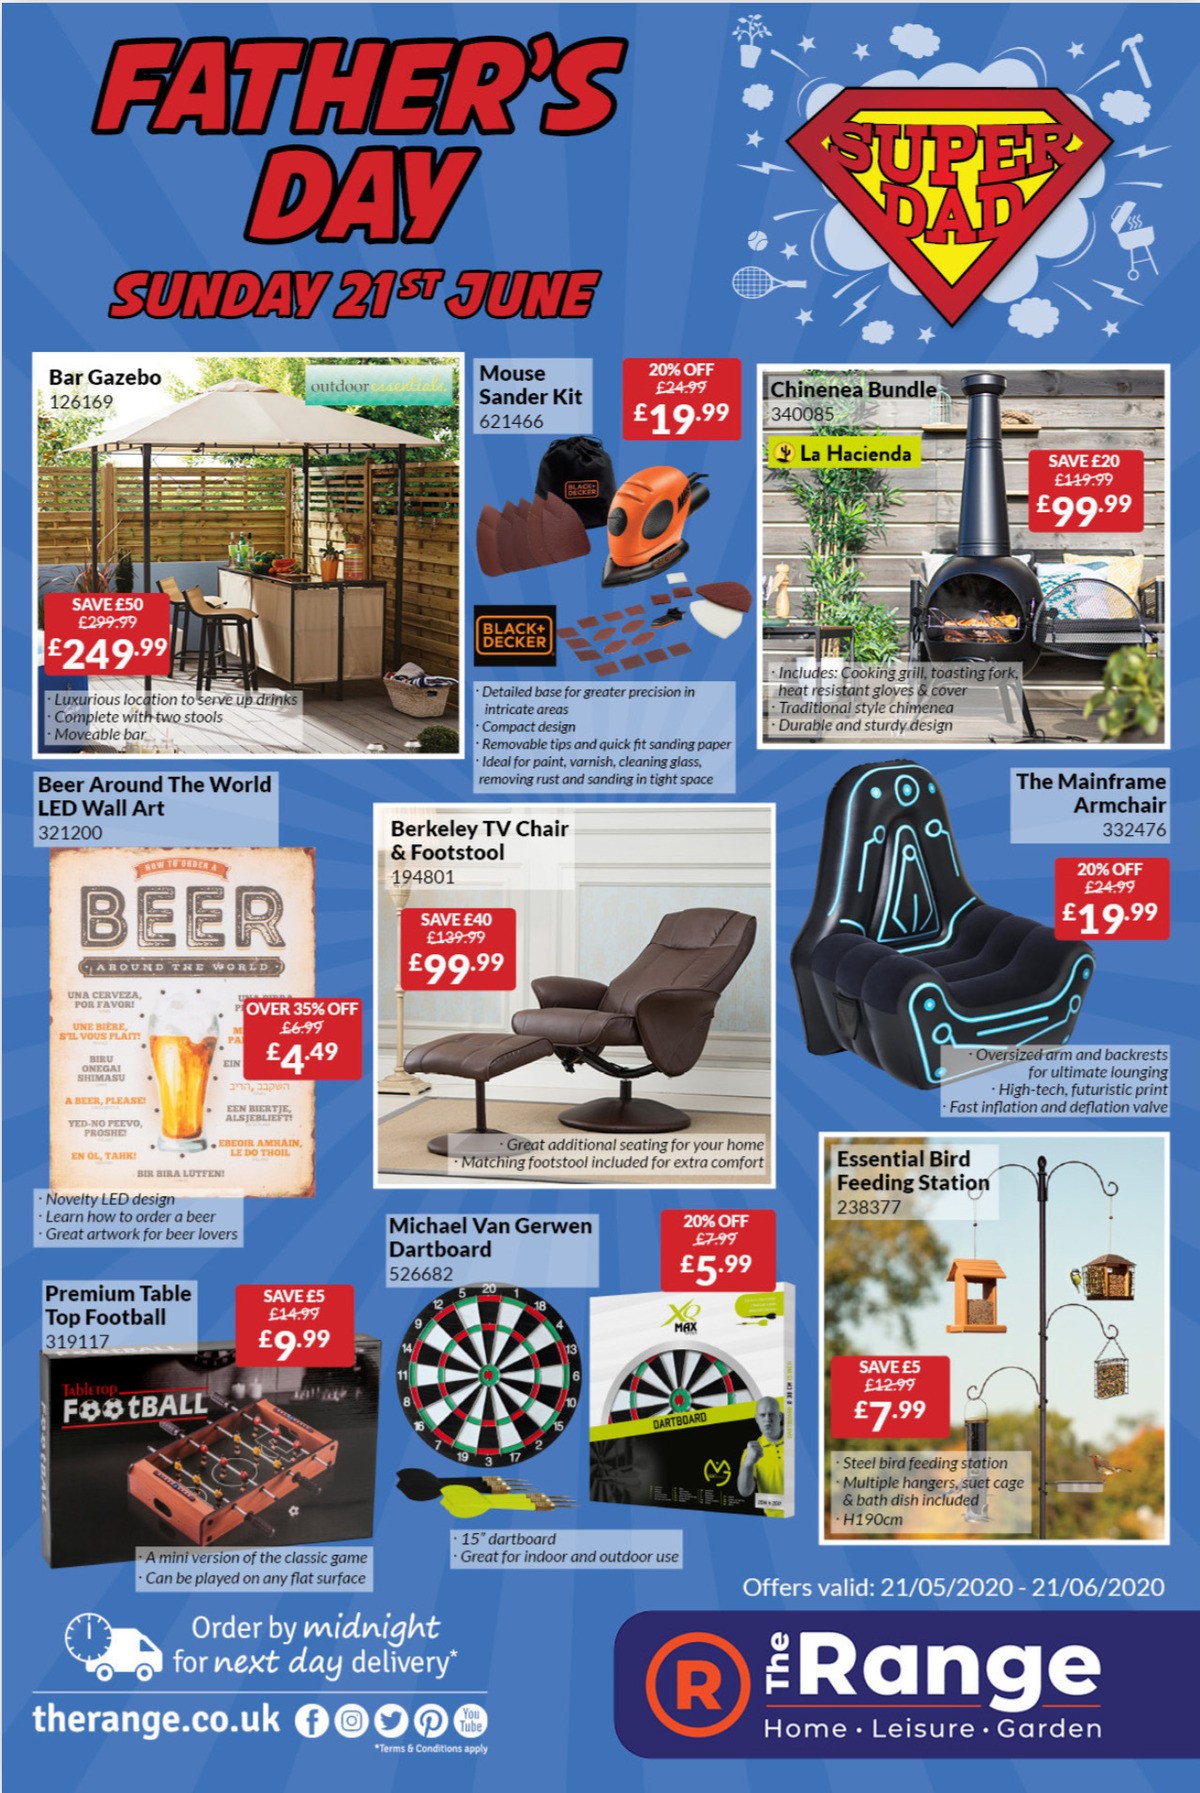 The Range Father's Day Offers from 21 May